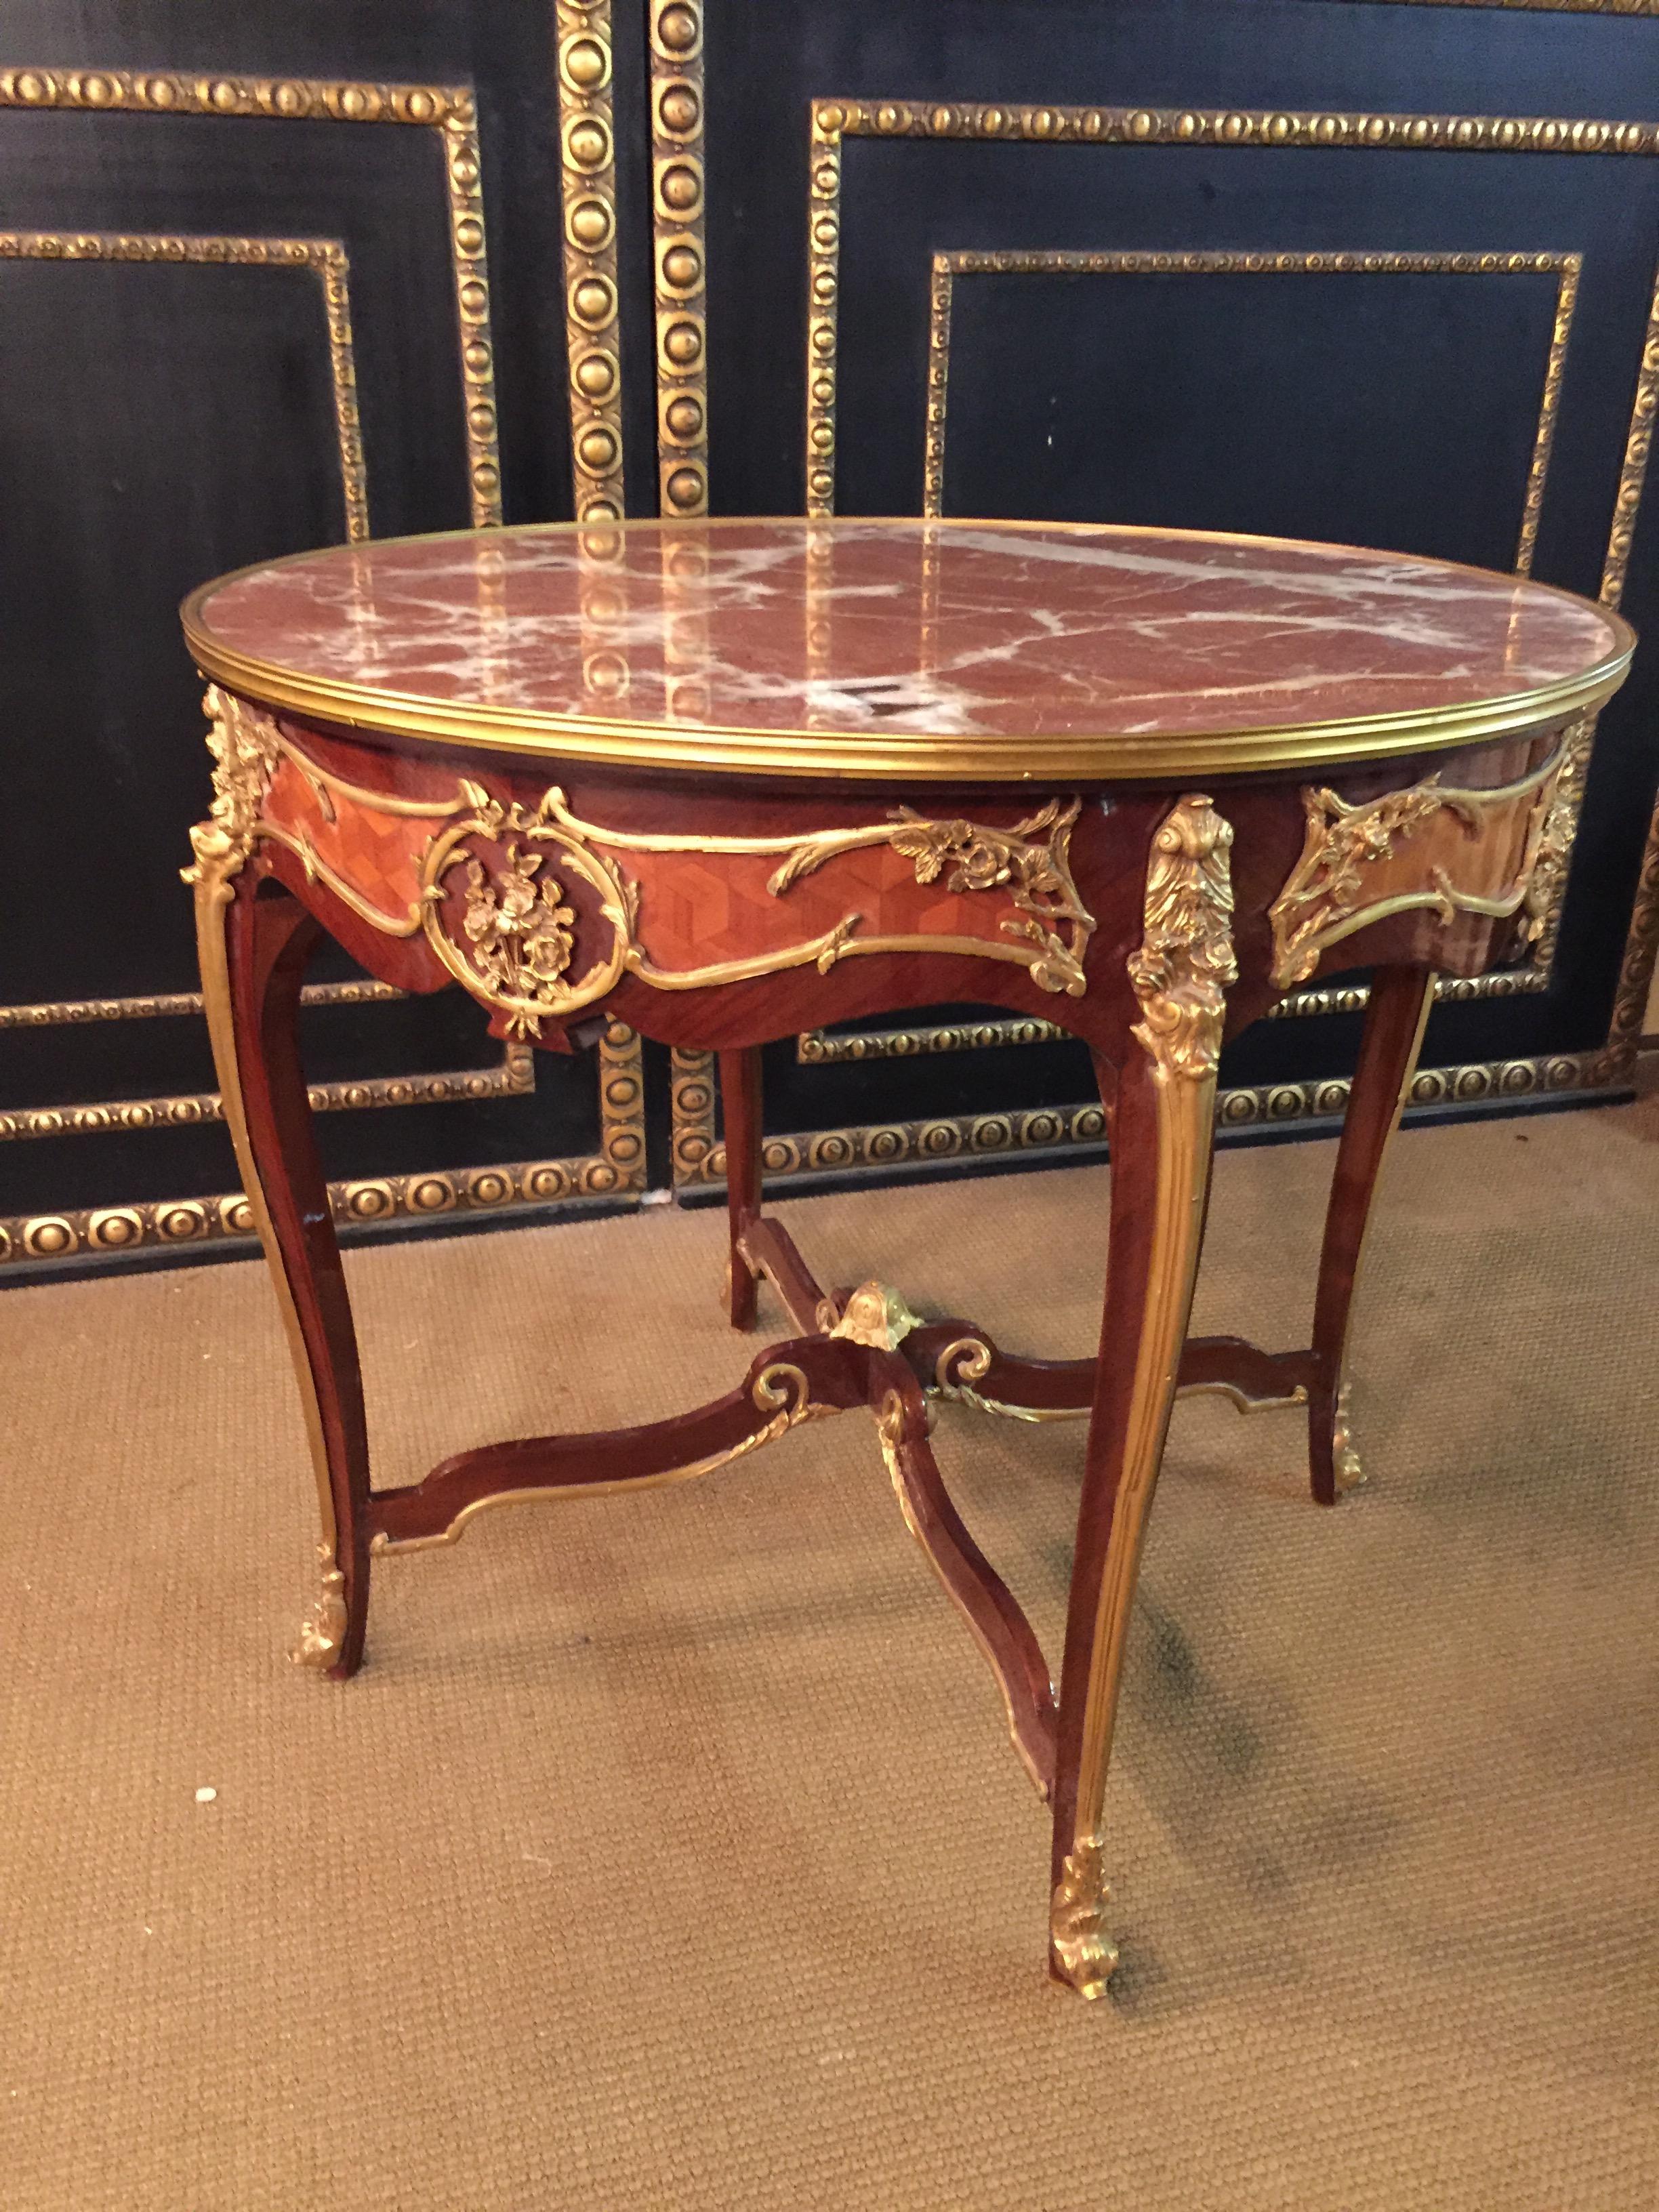 Rose veneer on solid pine wood. Exceptionally finest engraved, decorative broken seed beads inlaid with acanthus and blooming details. Round, single row brass border inlaid with a marble top. These proportions are accurate and require a high